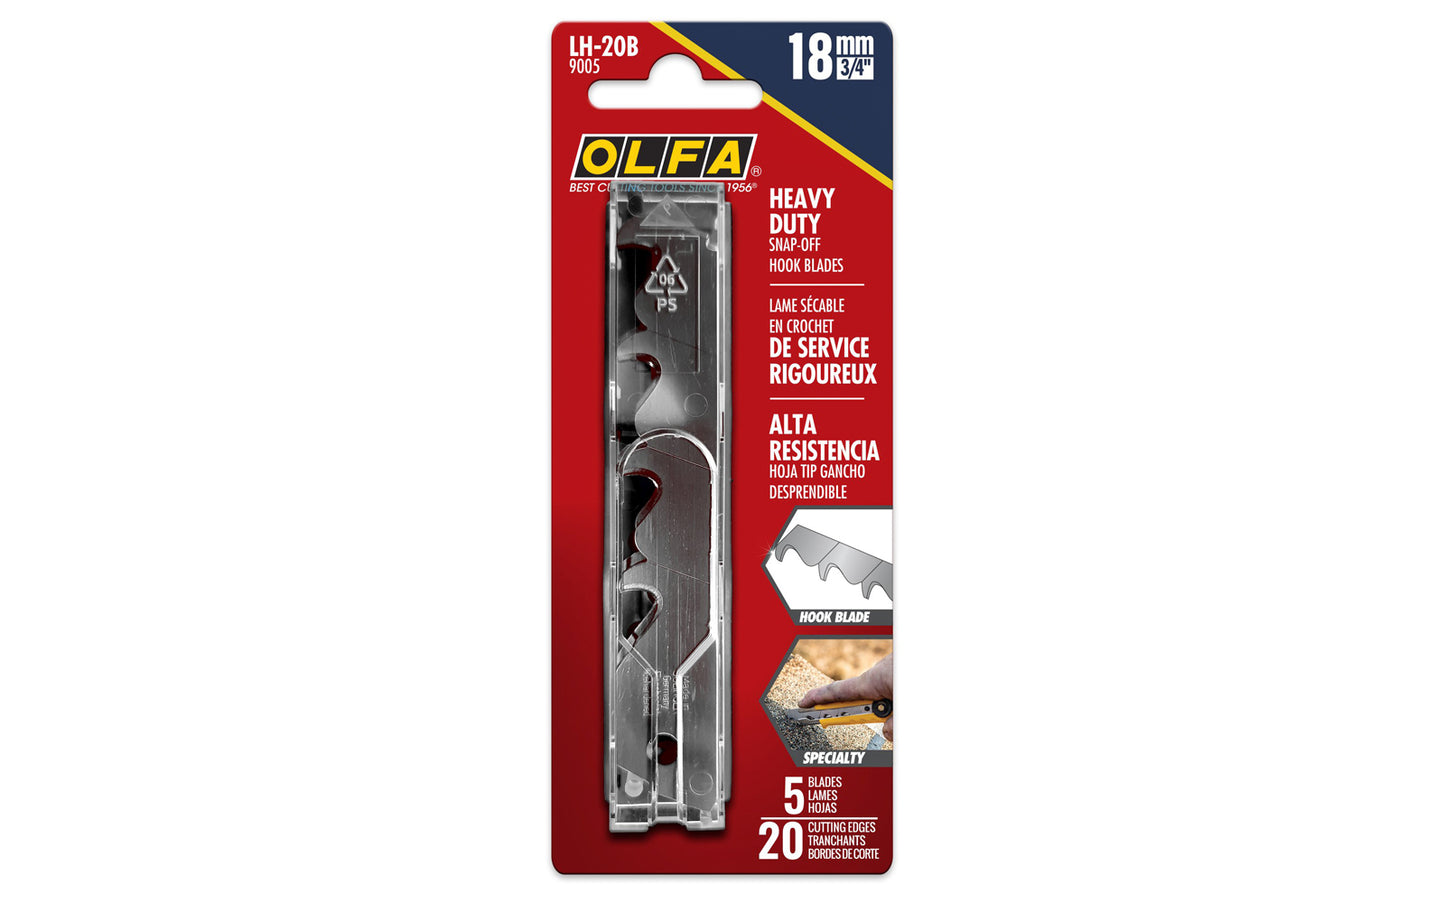 Olfa "LH-20B" 18 mm Hook Replacement Blades are designed with high-quality carbon tool steel for an ultra-sharp edge, & the 18mm blades are shaped to pull material toward the blade while keeping the sharp edge away. Hook shape protects surface under cut - Perfect for carpet, house wrap, shingles, & more. 5 Pack